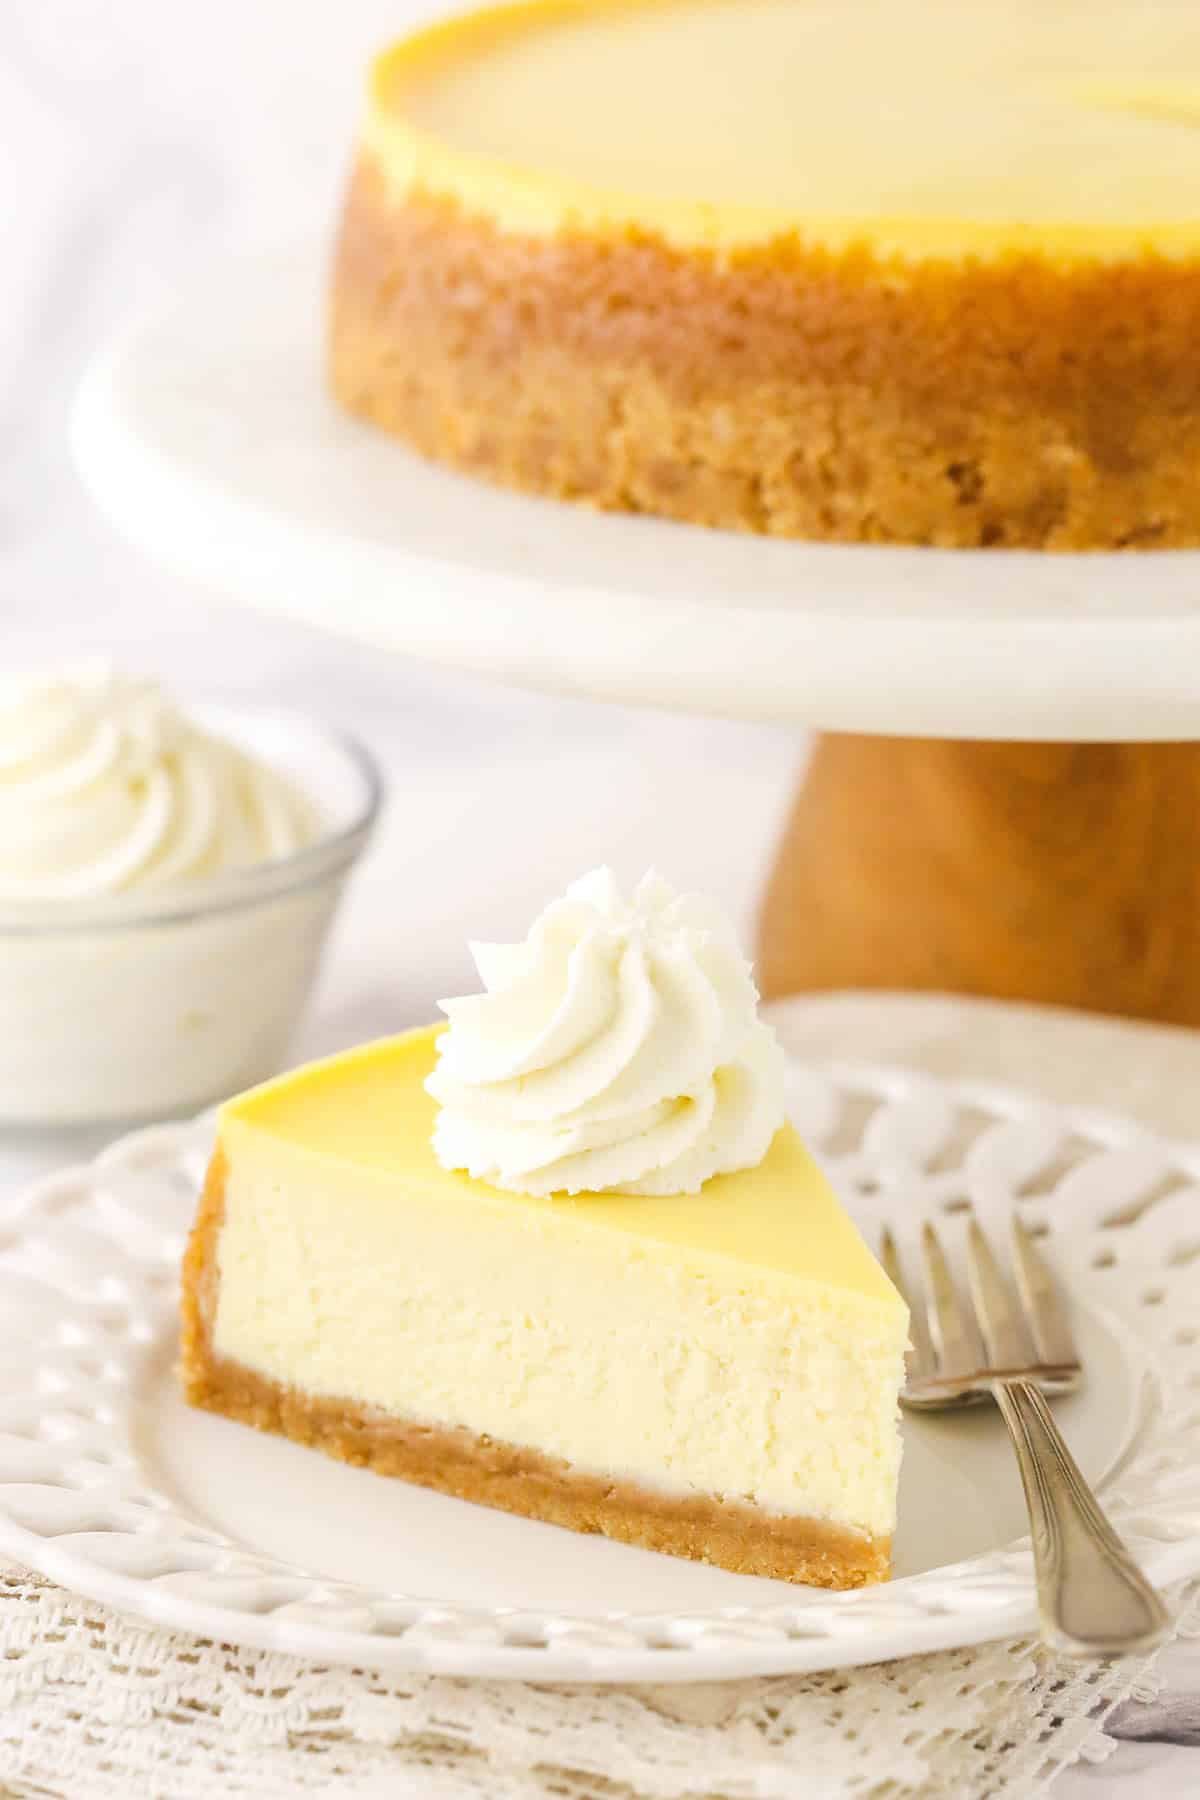 A slice of cheesecake with a dollop of whipped cream